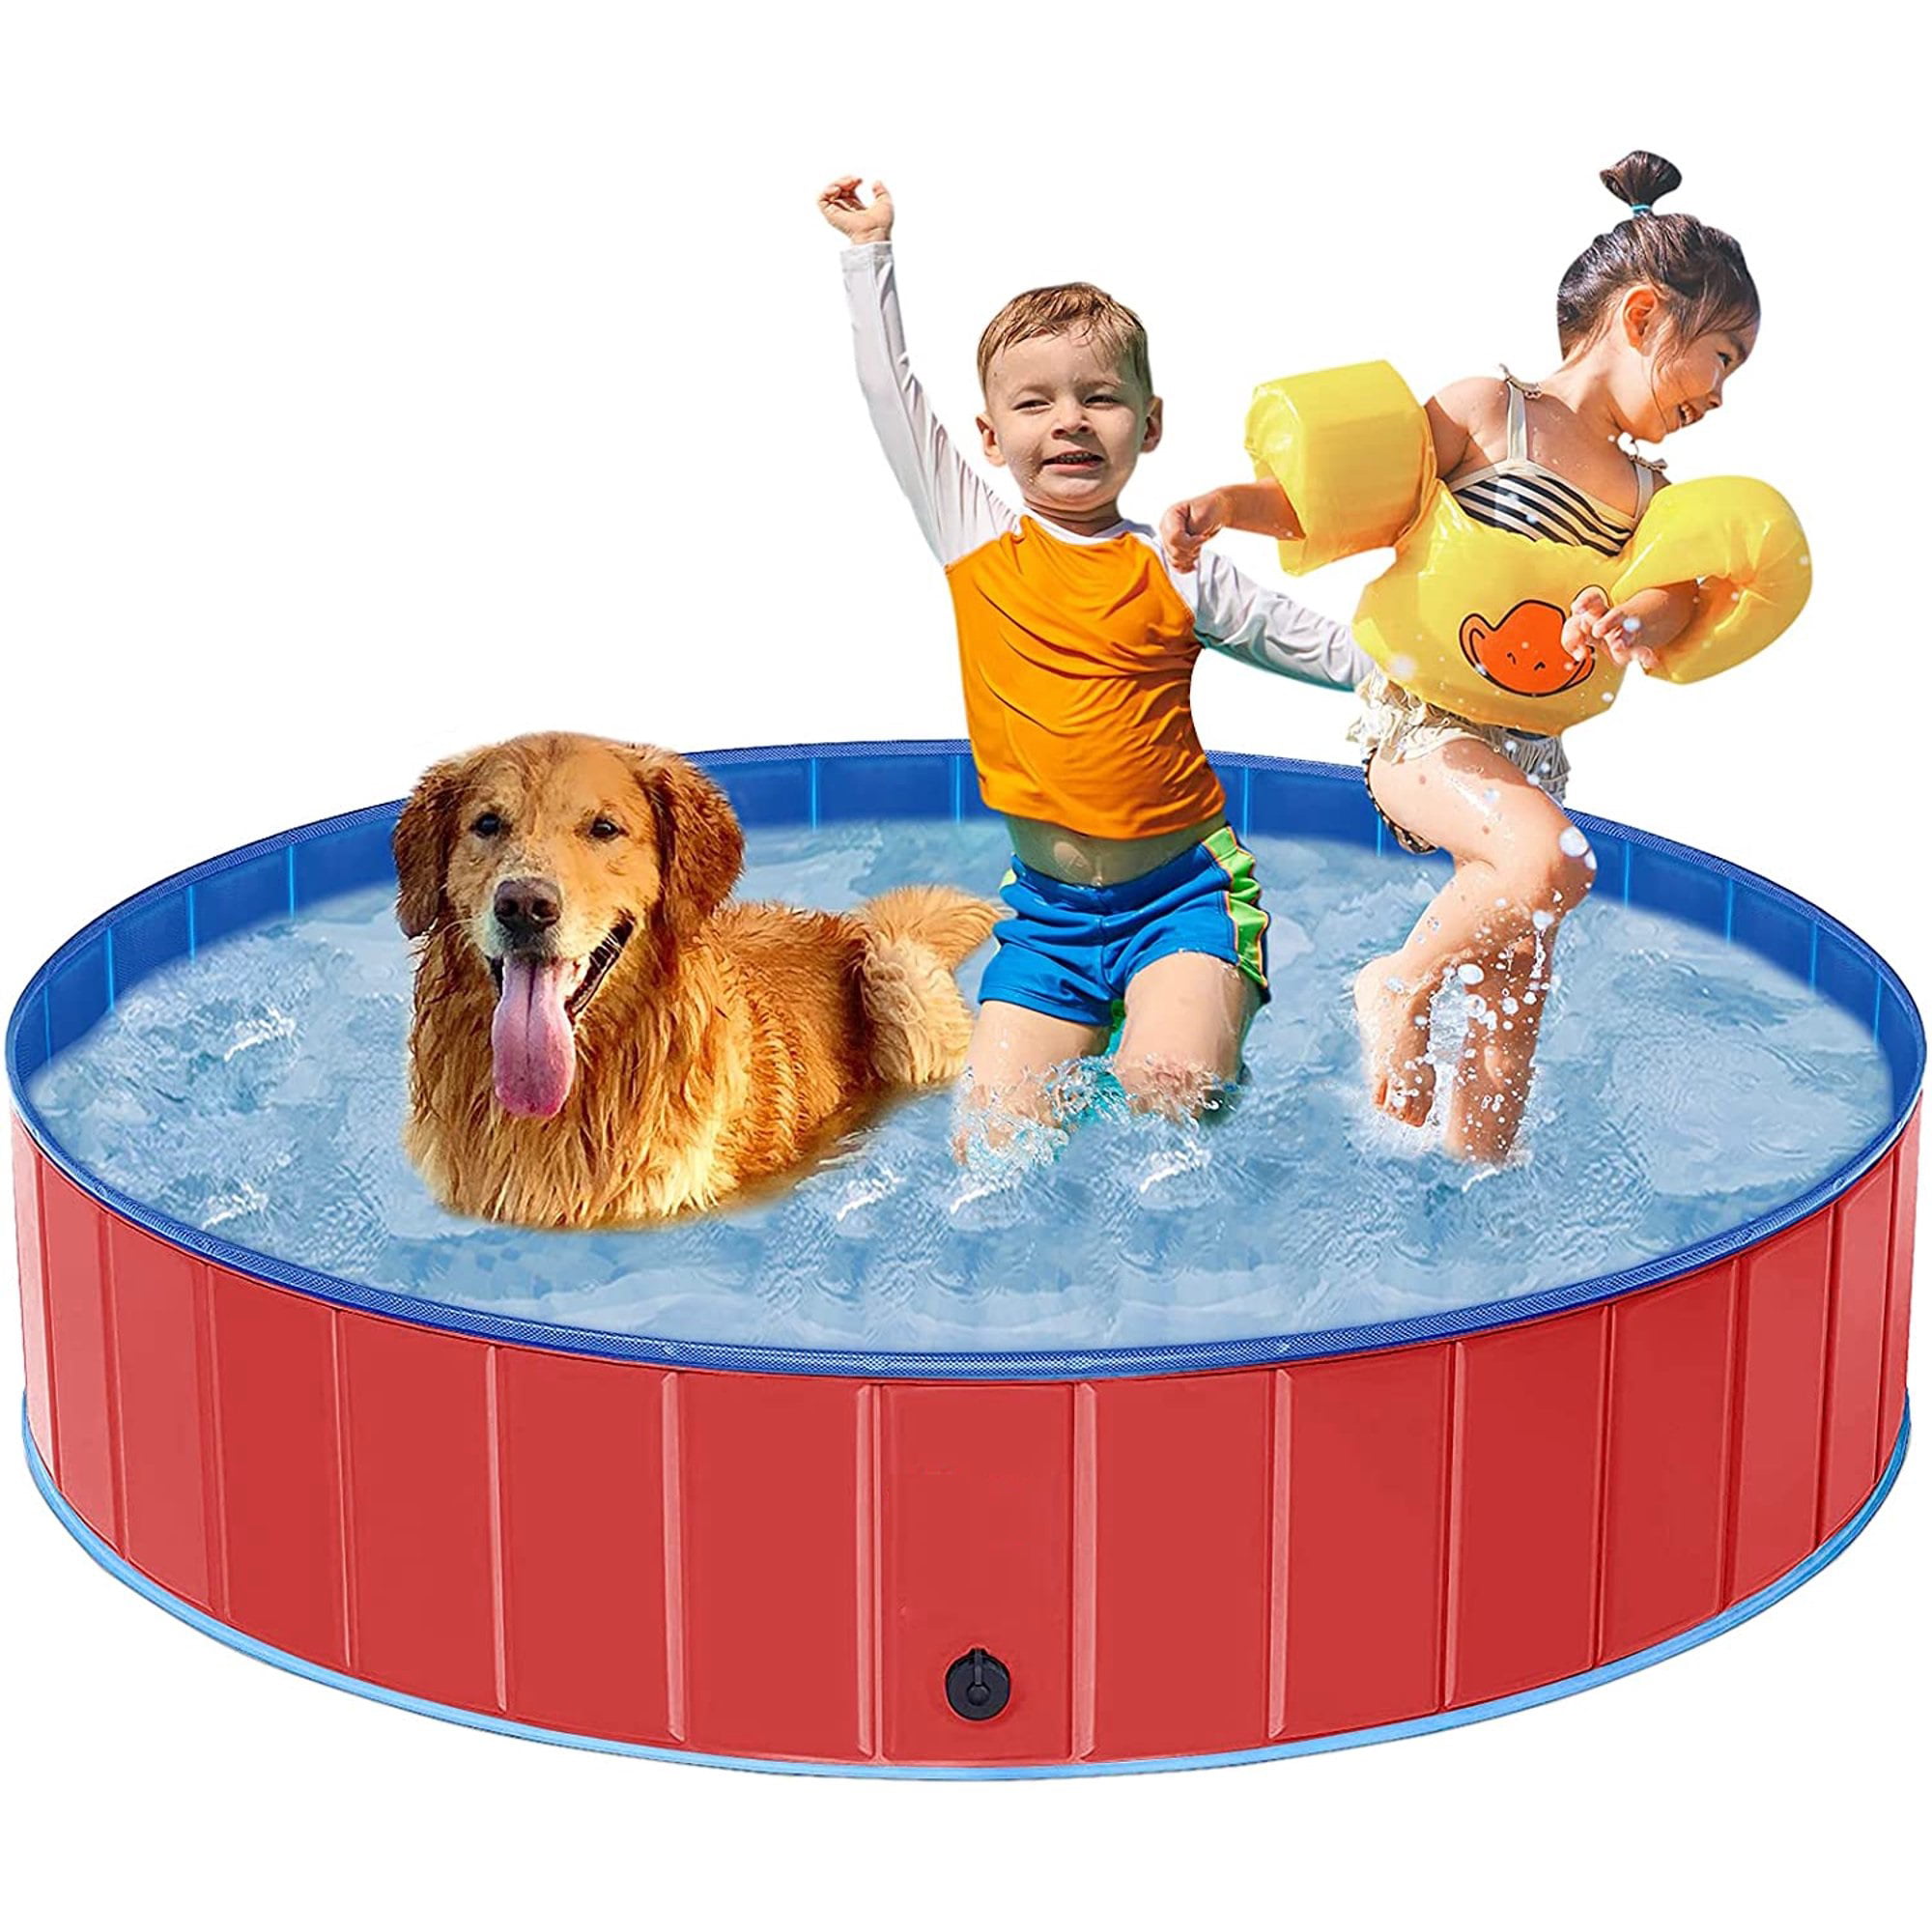 Inflatable Pools for Dogs: Keeping Your Pets Cool